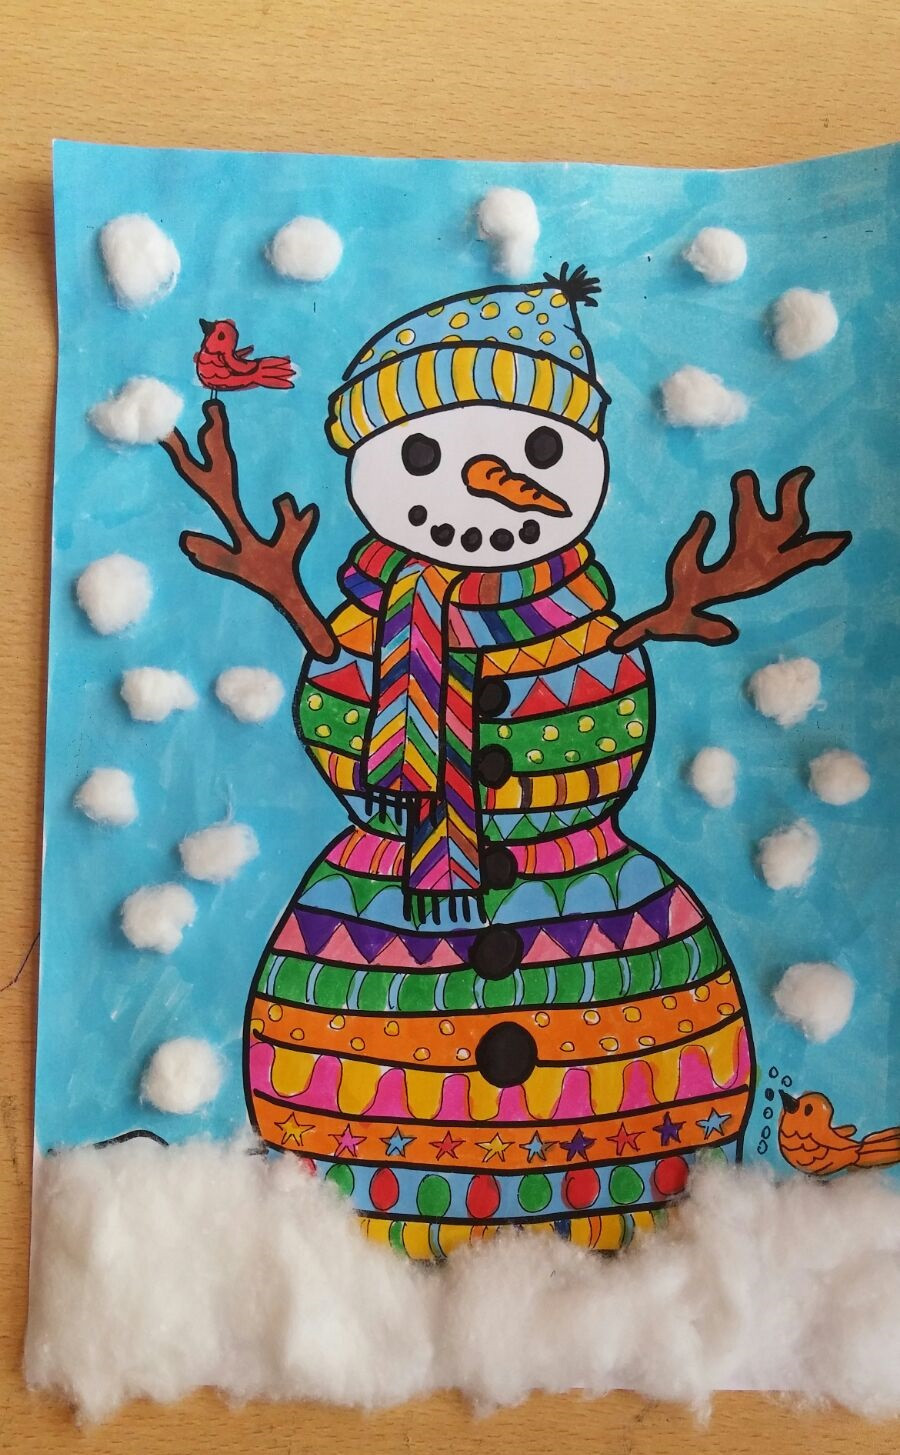 Crafts For Preschool Kids
 How to Make Snowman Craft for Kids Preschool and